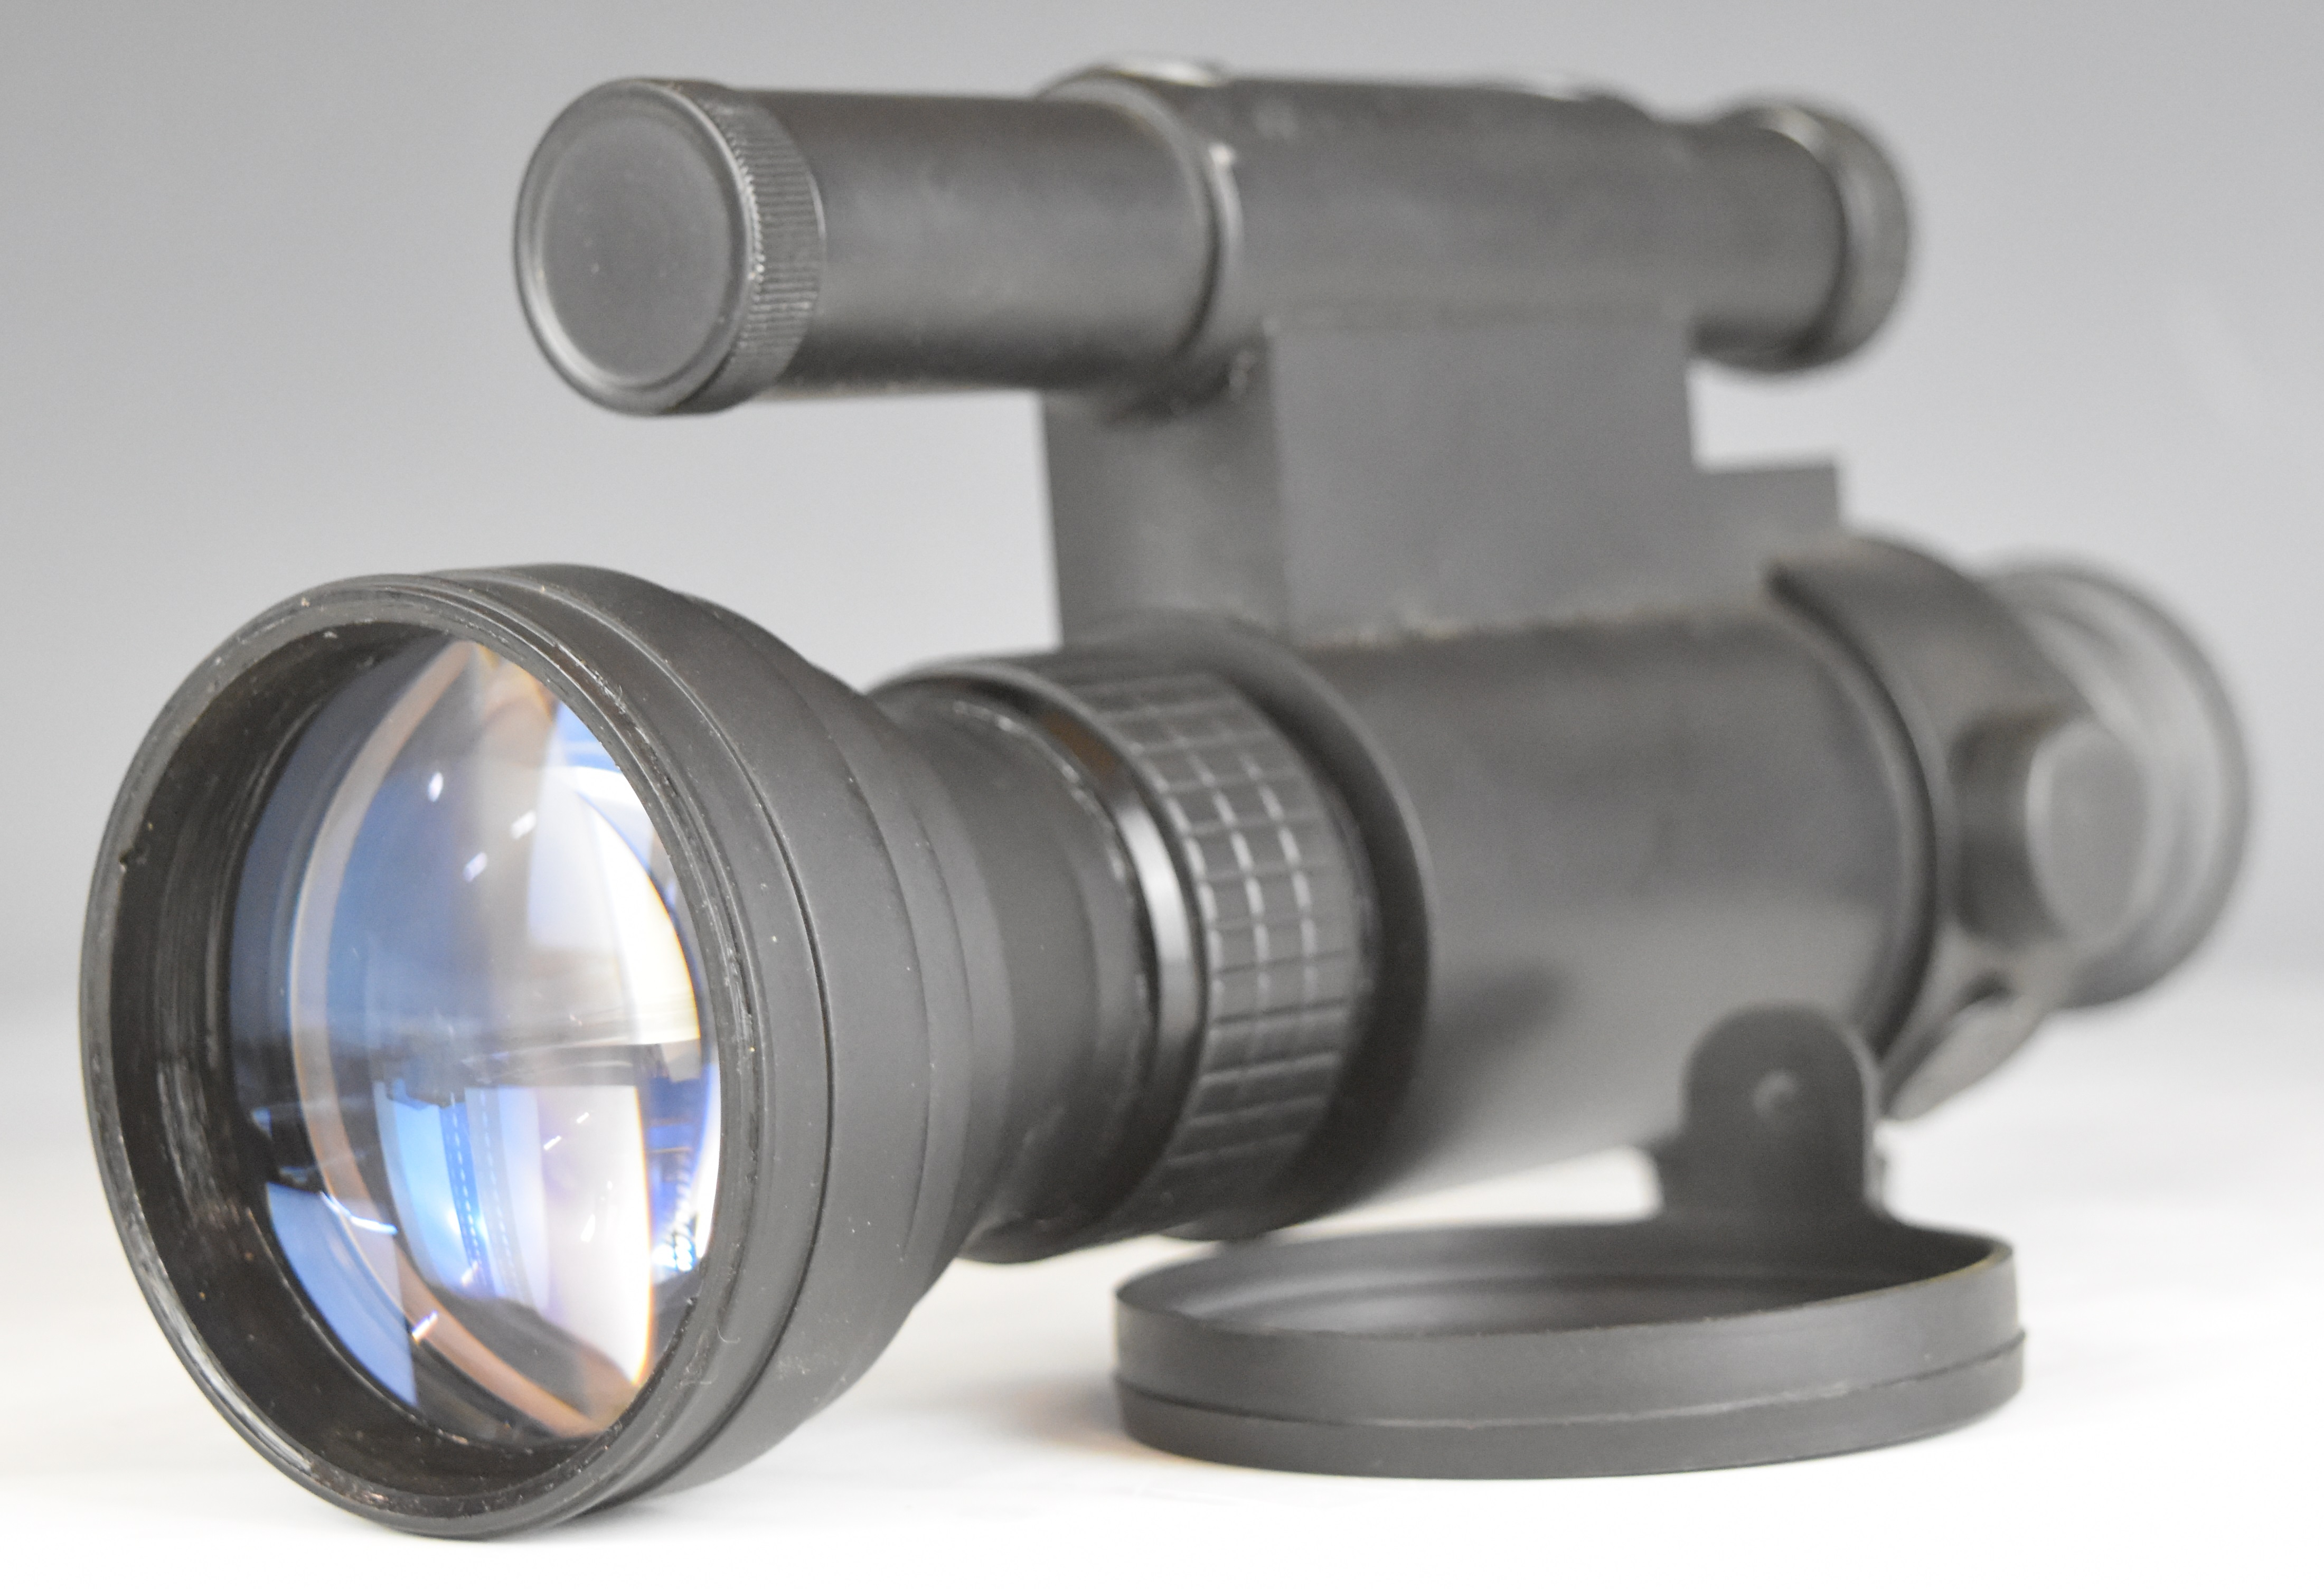 Unnamed night vision rifle or spotting scope.